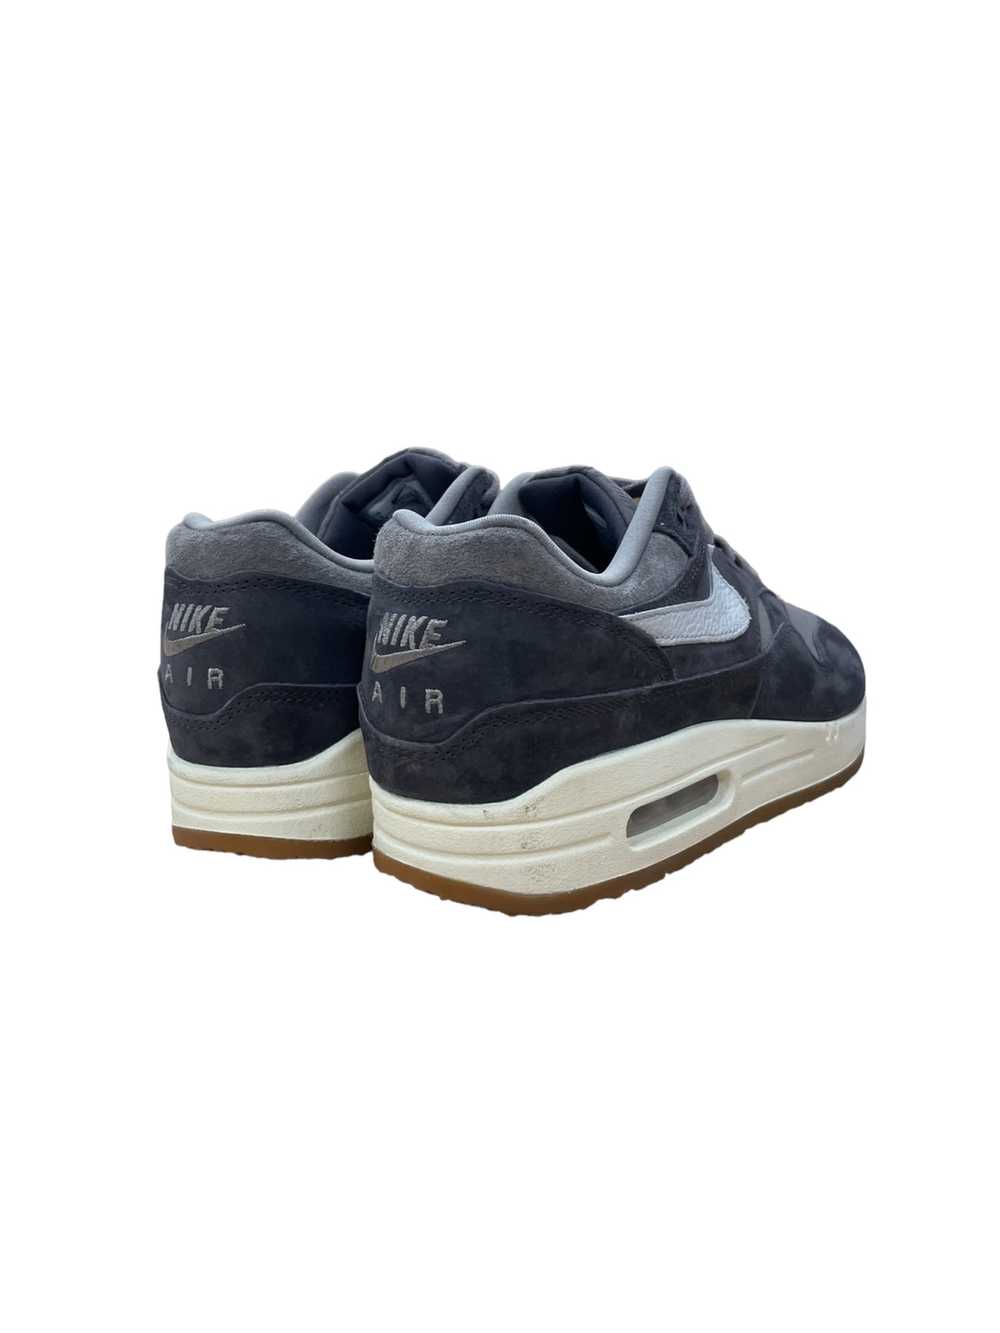 NIKE/Low-Sneakers/US 9/Suede/GRY/AIR MAX 1 - image 3